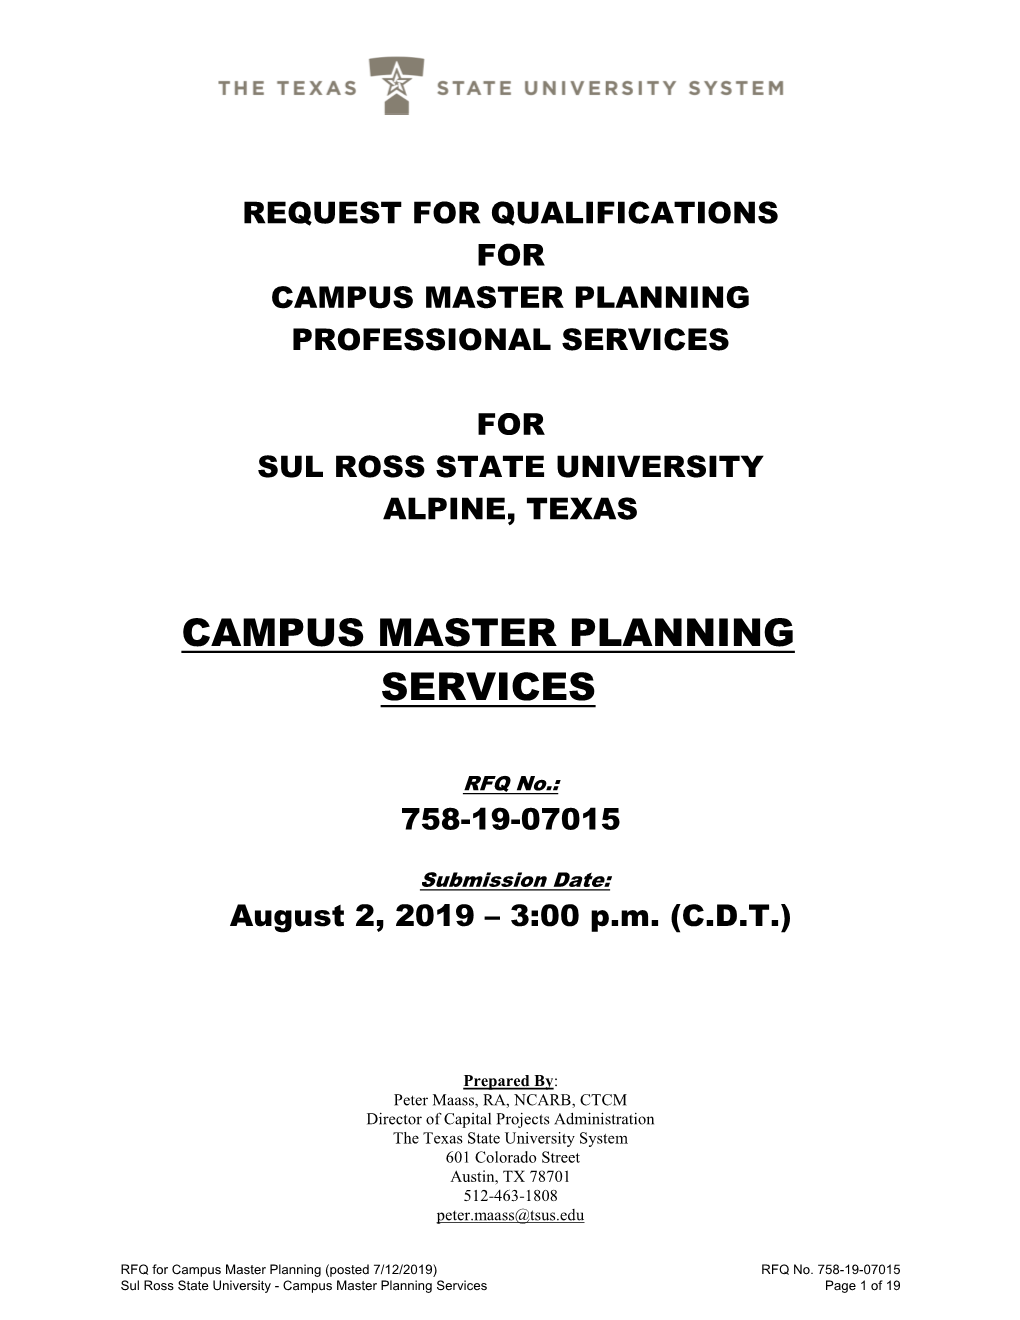 Request for Qualifications for Campus Master Planning Professional Services